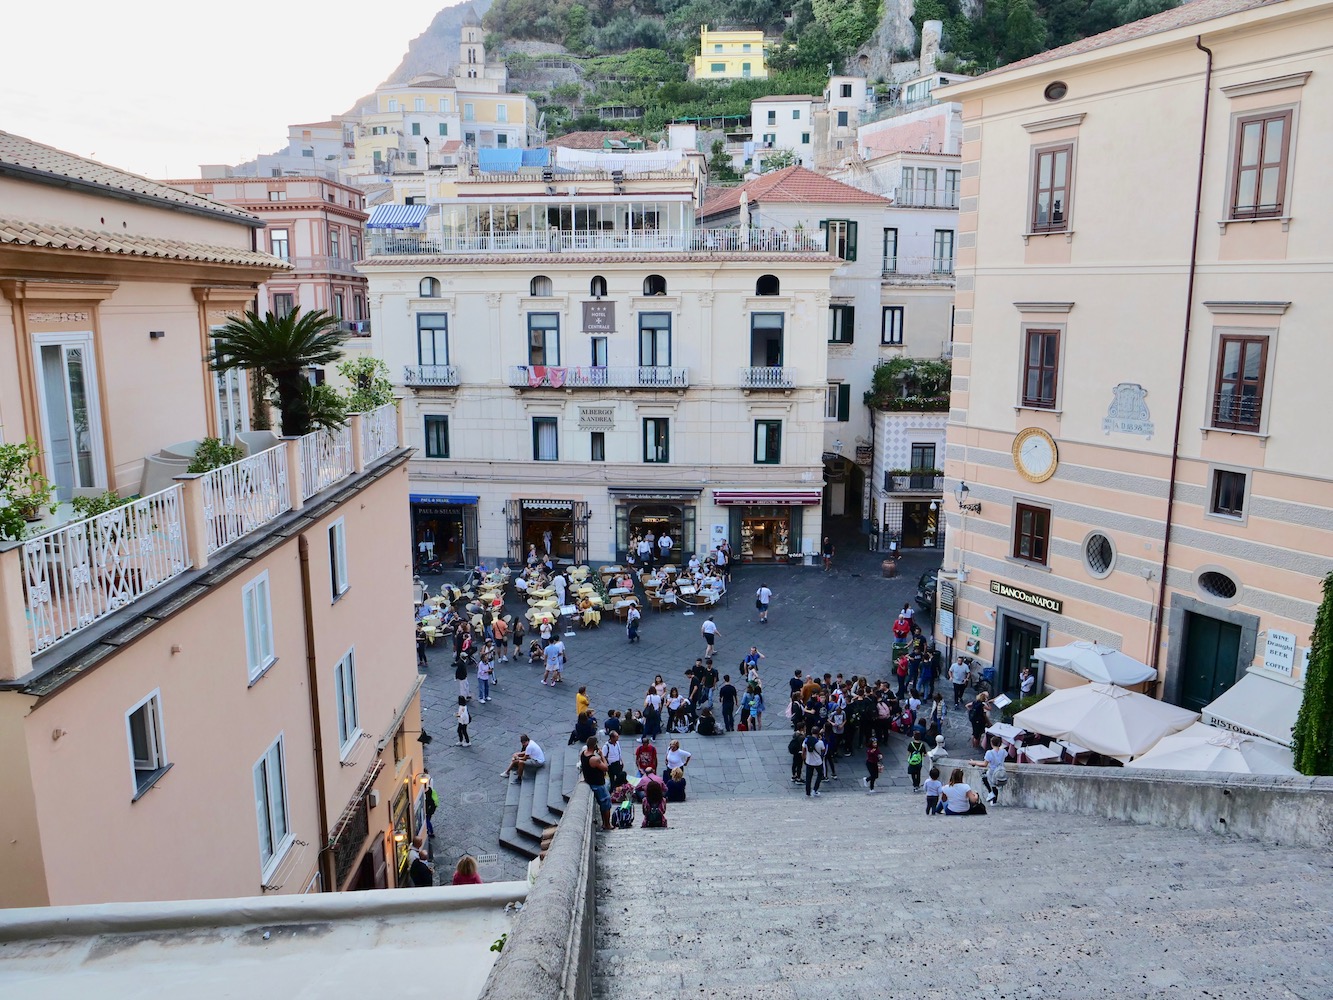  The town square in Amalfi. 